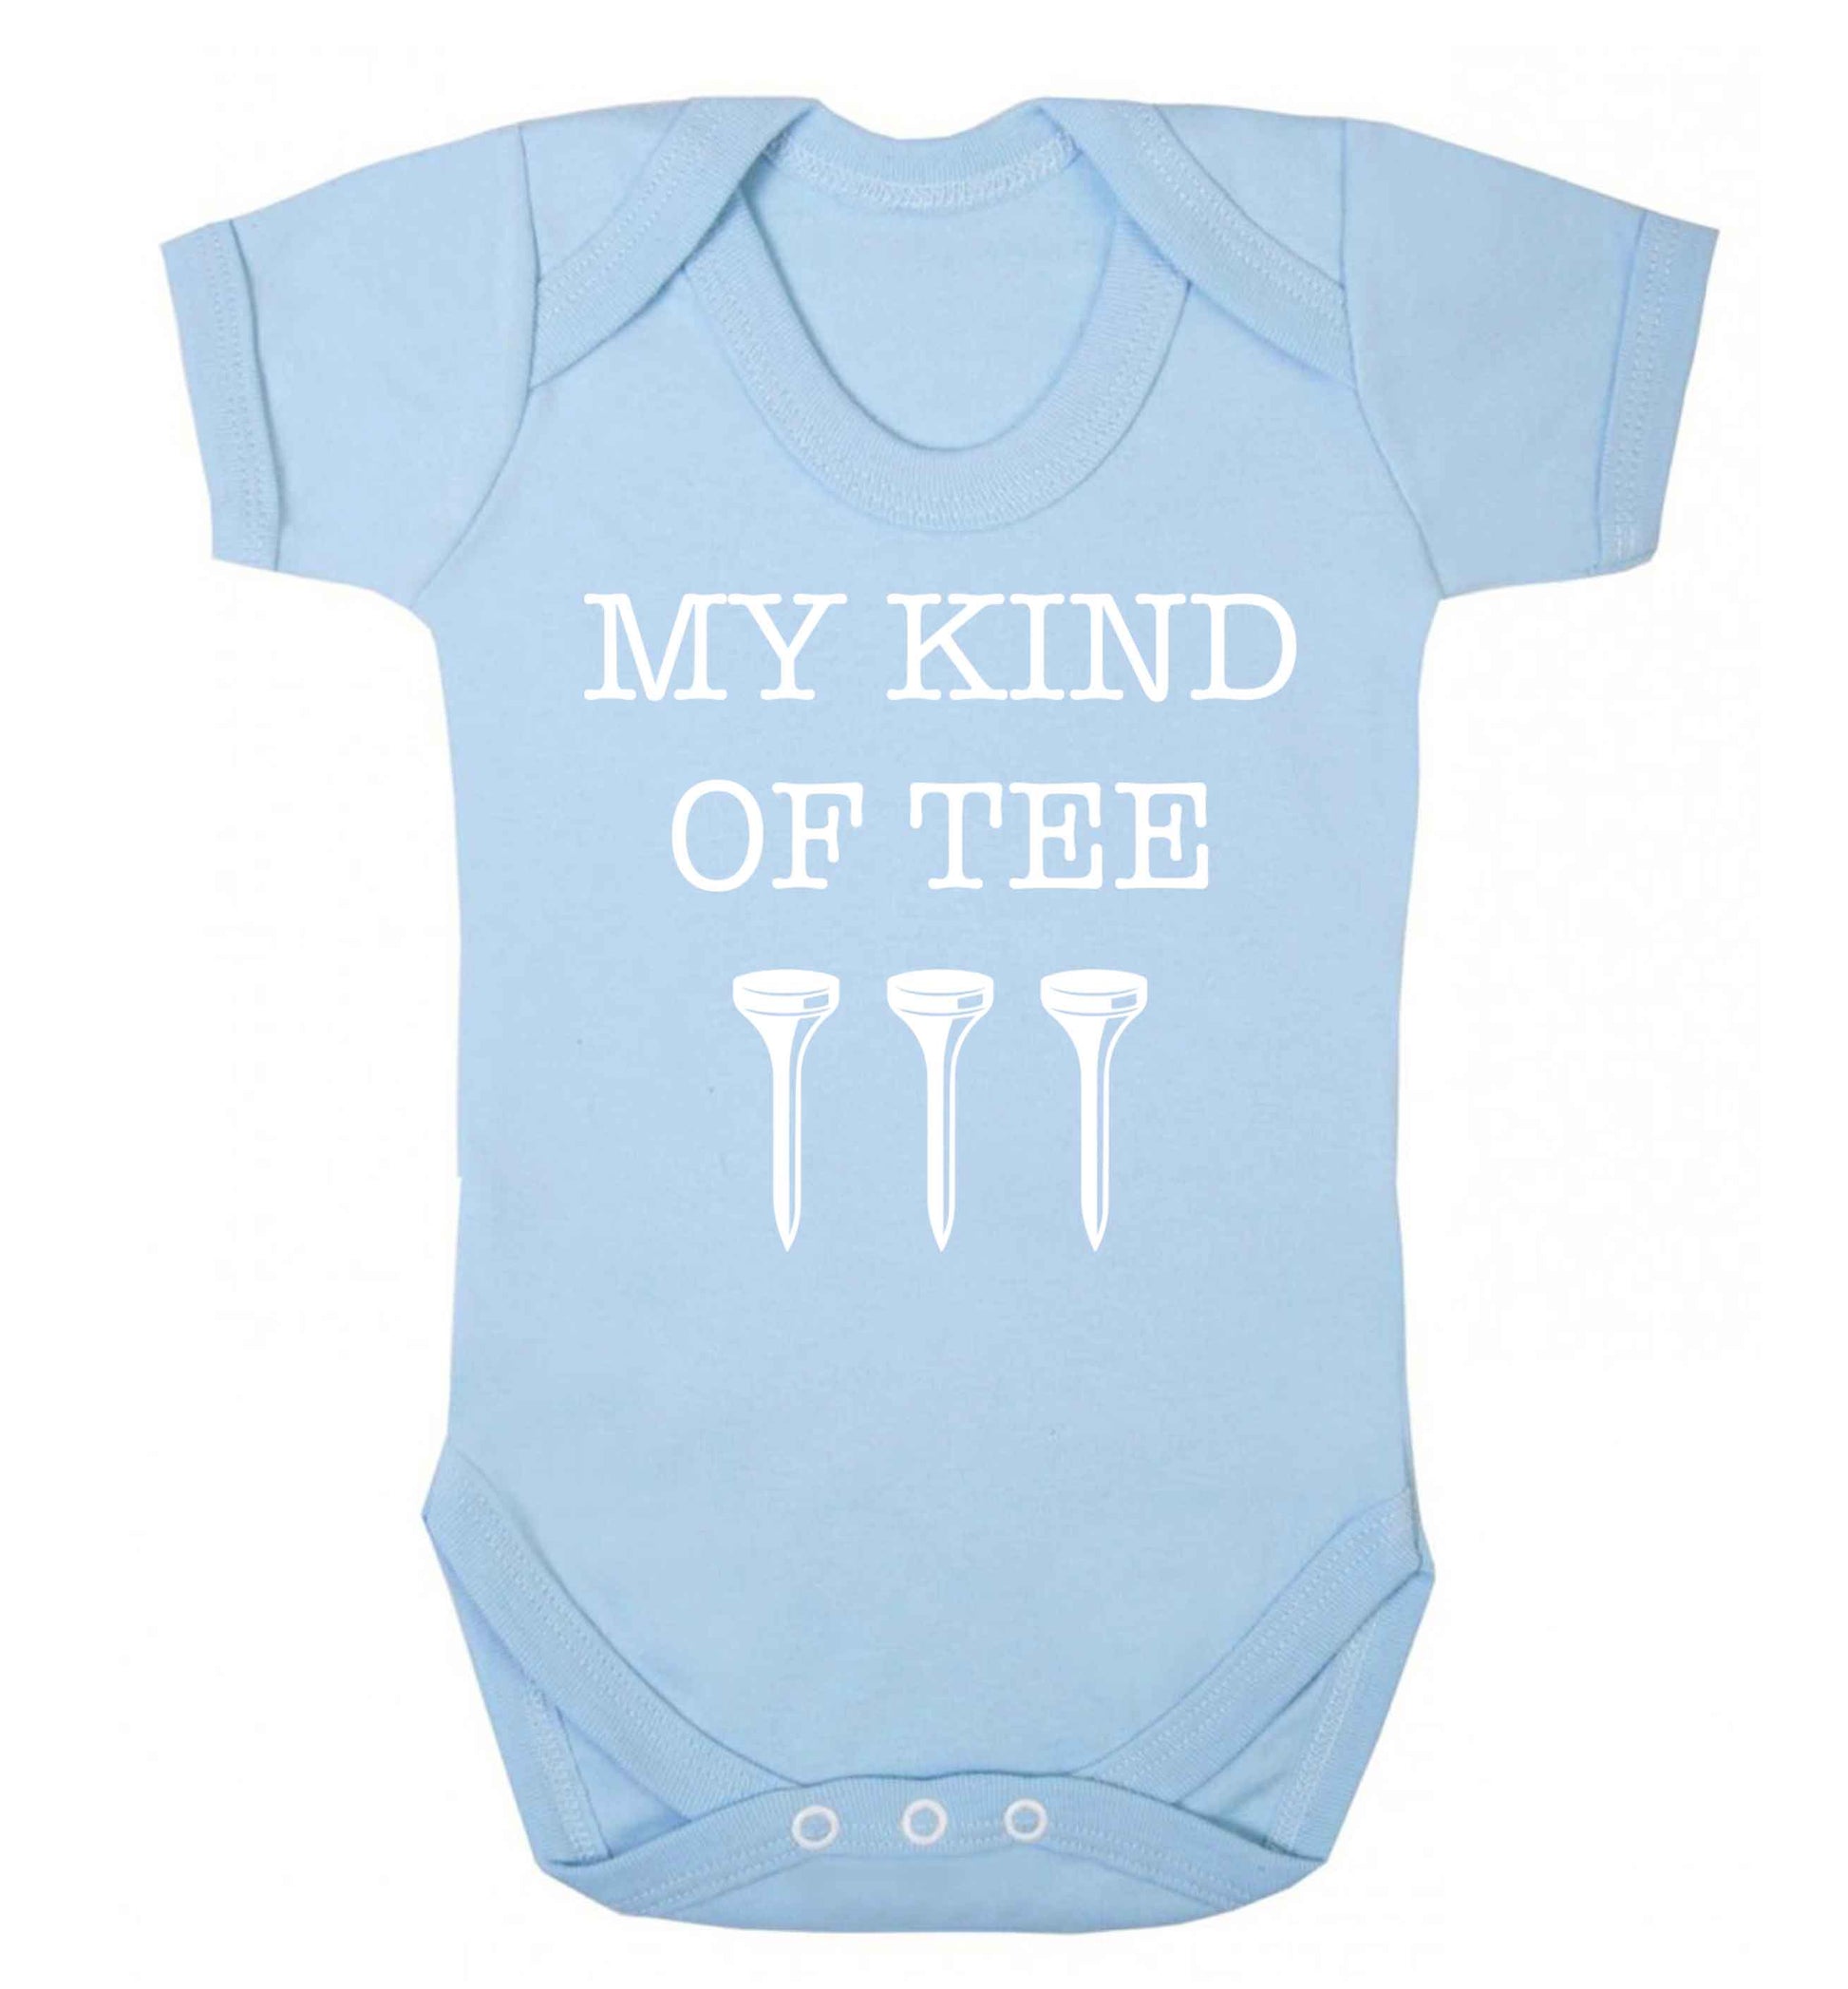 My kind of tee Baby Vest pale blue 18-24 months